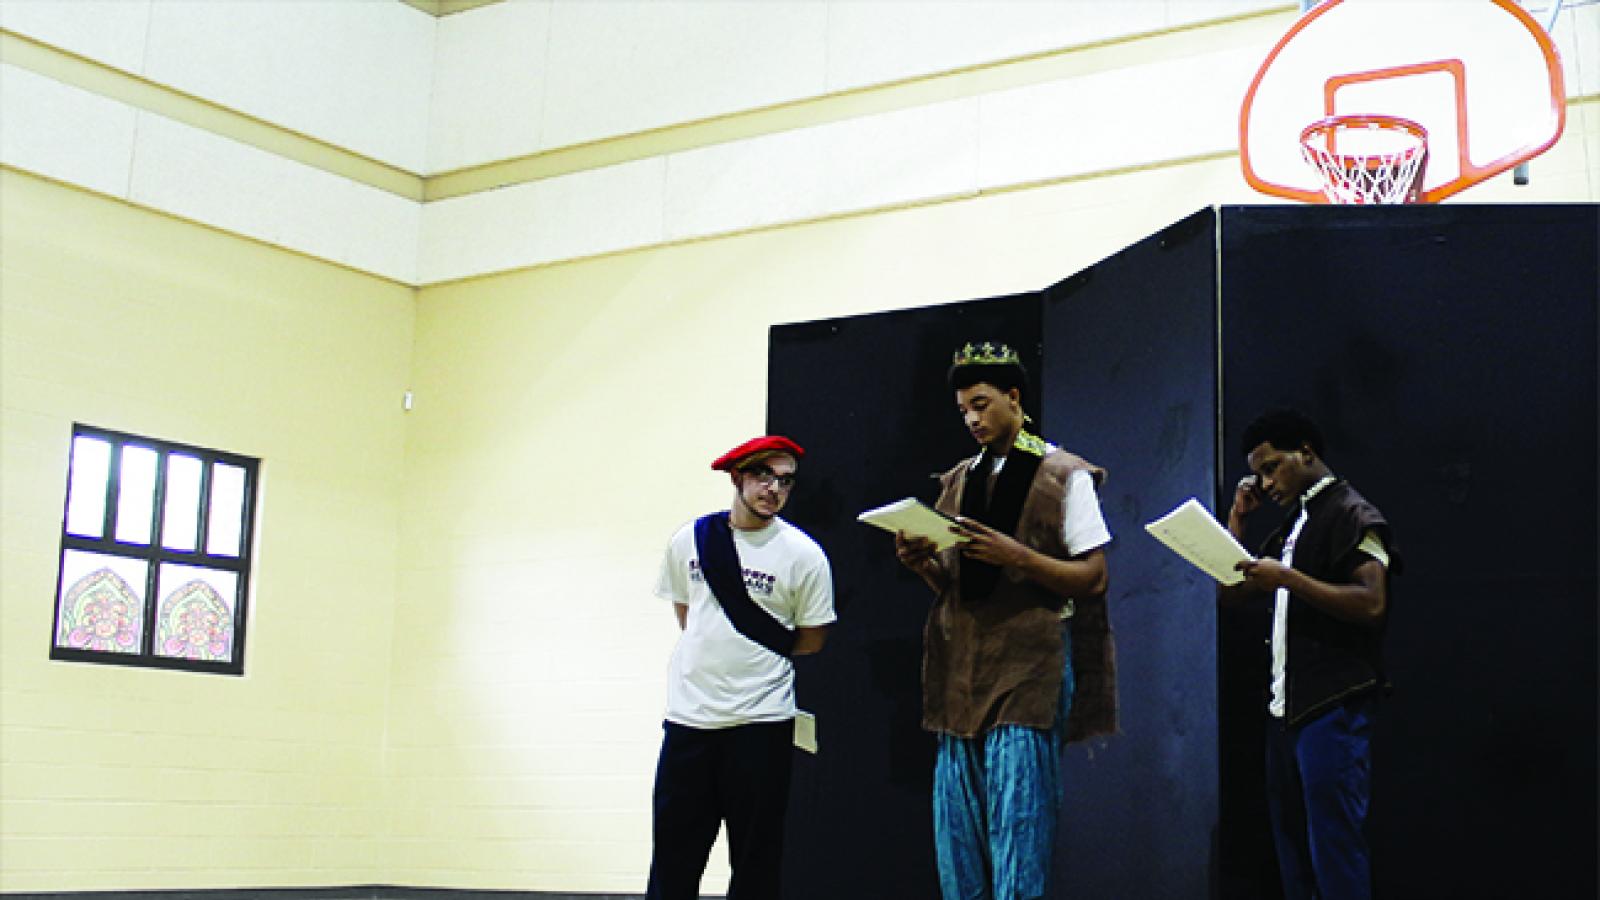 Three young men wearing costumes read from scripts in a gymnasium